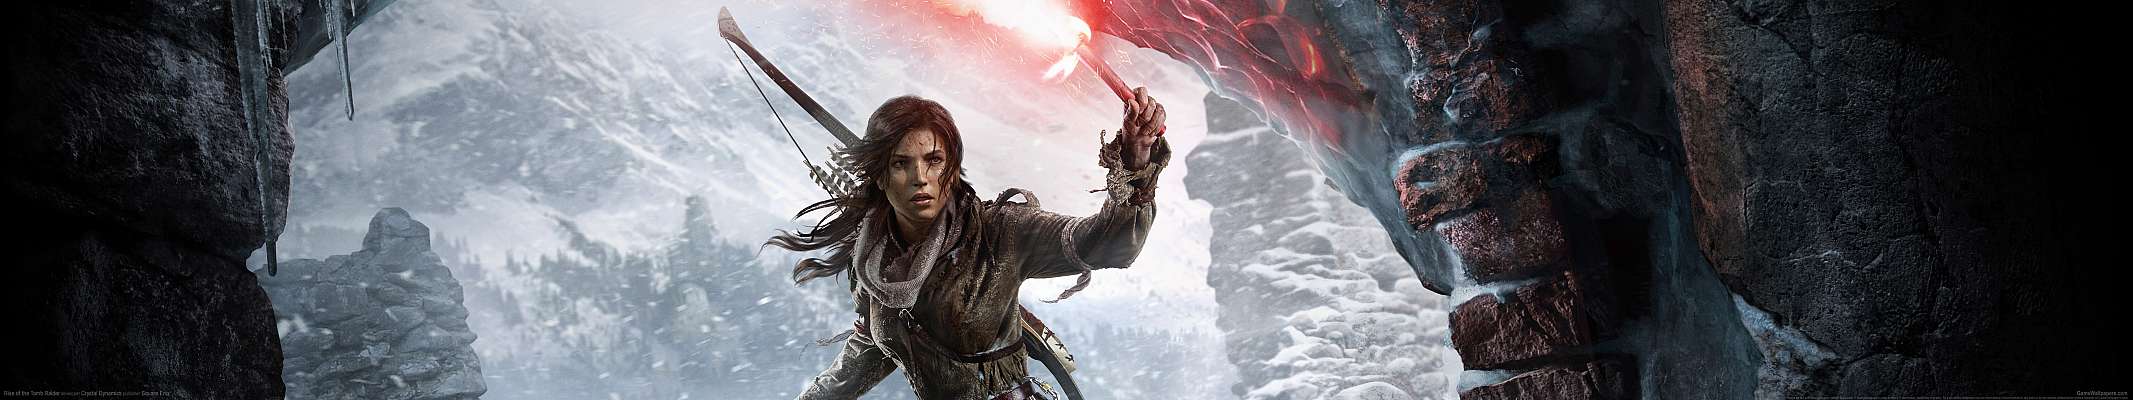 Rise of the Tomb Raider triple screen achtergrond